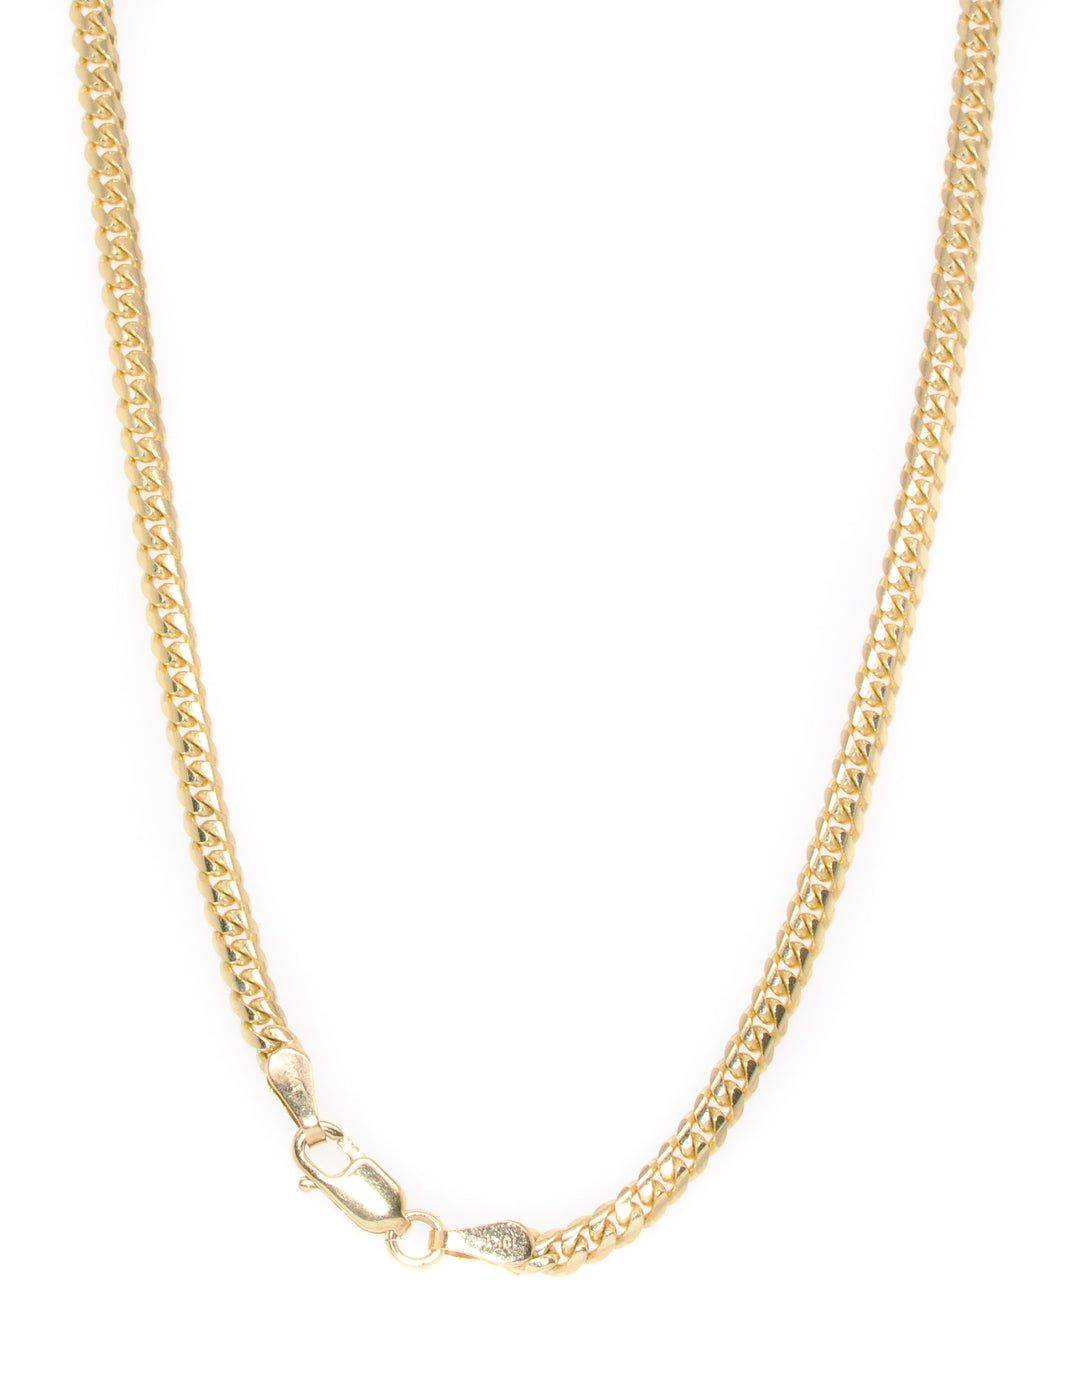 10KT Yellow Gold 18" 2.5mm Light Curb Link Chain.